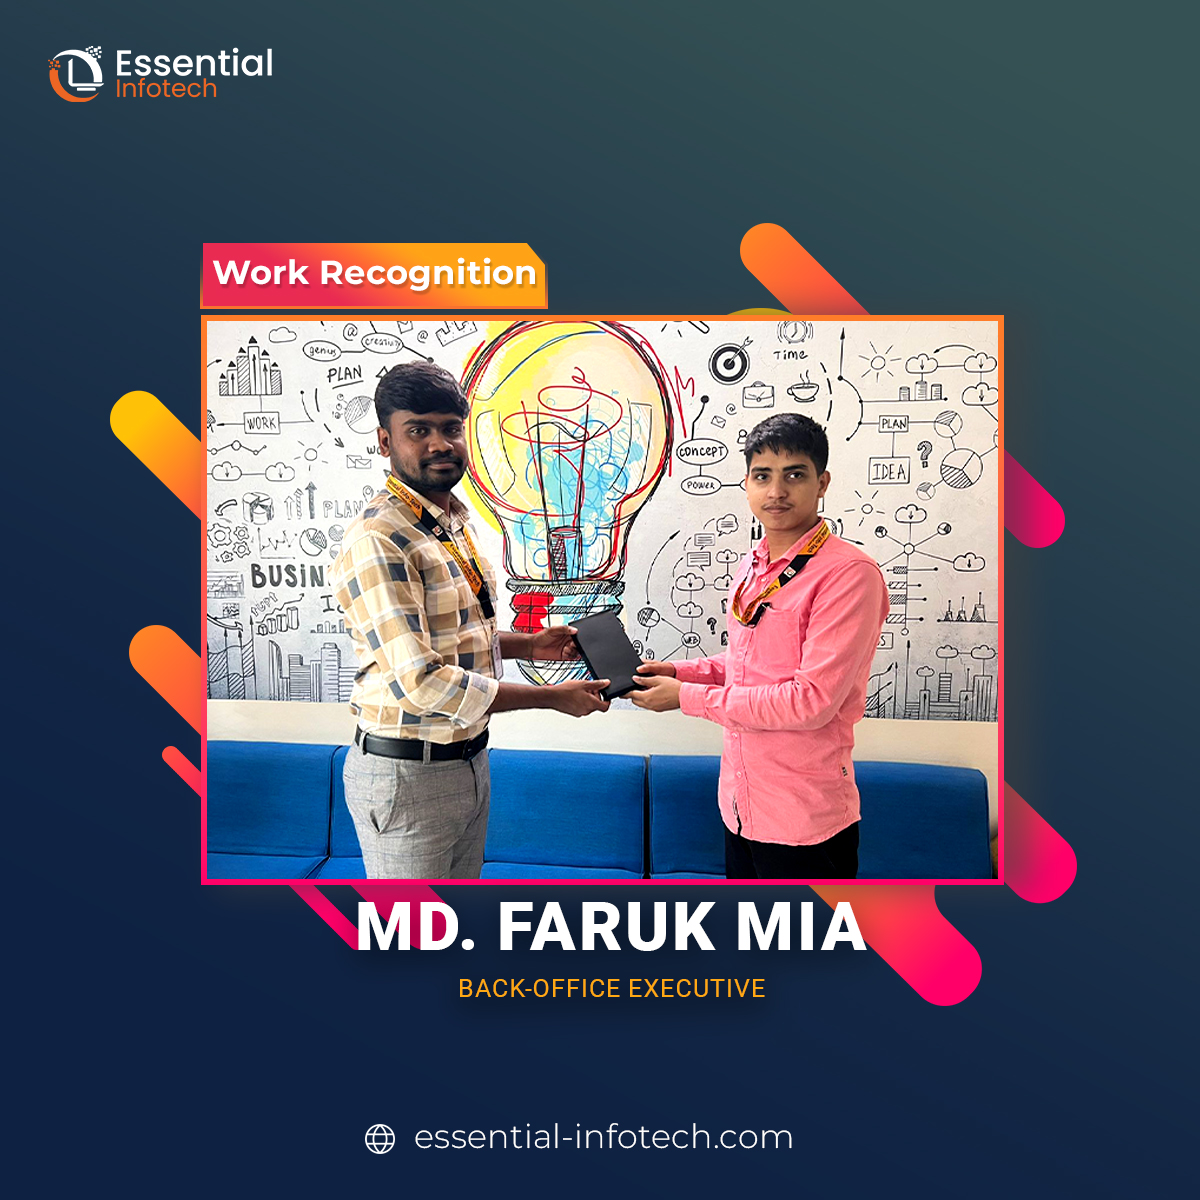 Congratulations to Md. Faruk Mia 🎉 We are presenting him a small gift of appreciation for his dedication and hard work 🏅. The management team is impressed by his performance and believes he can achieve greater things in future. #EssentialInfotech #HardWork #Congratulations